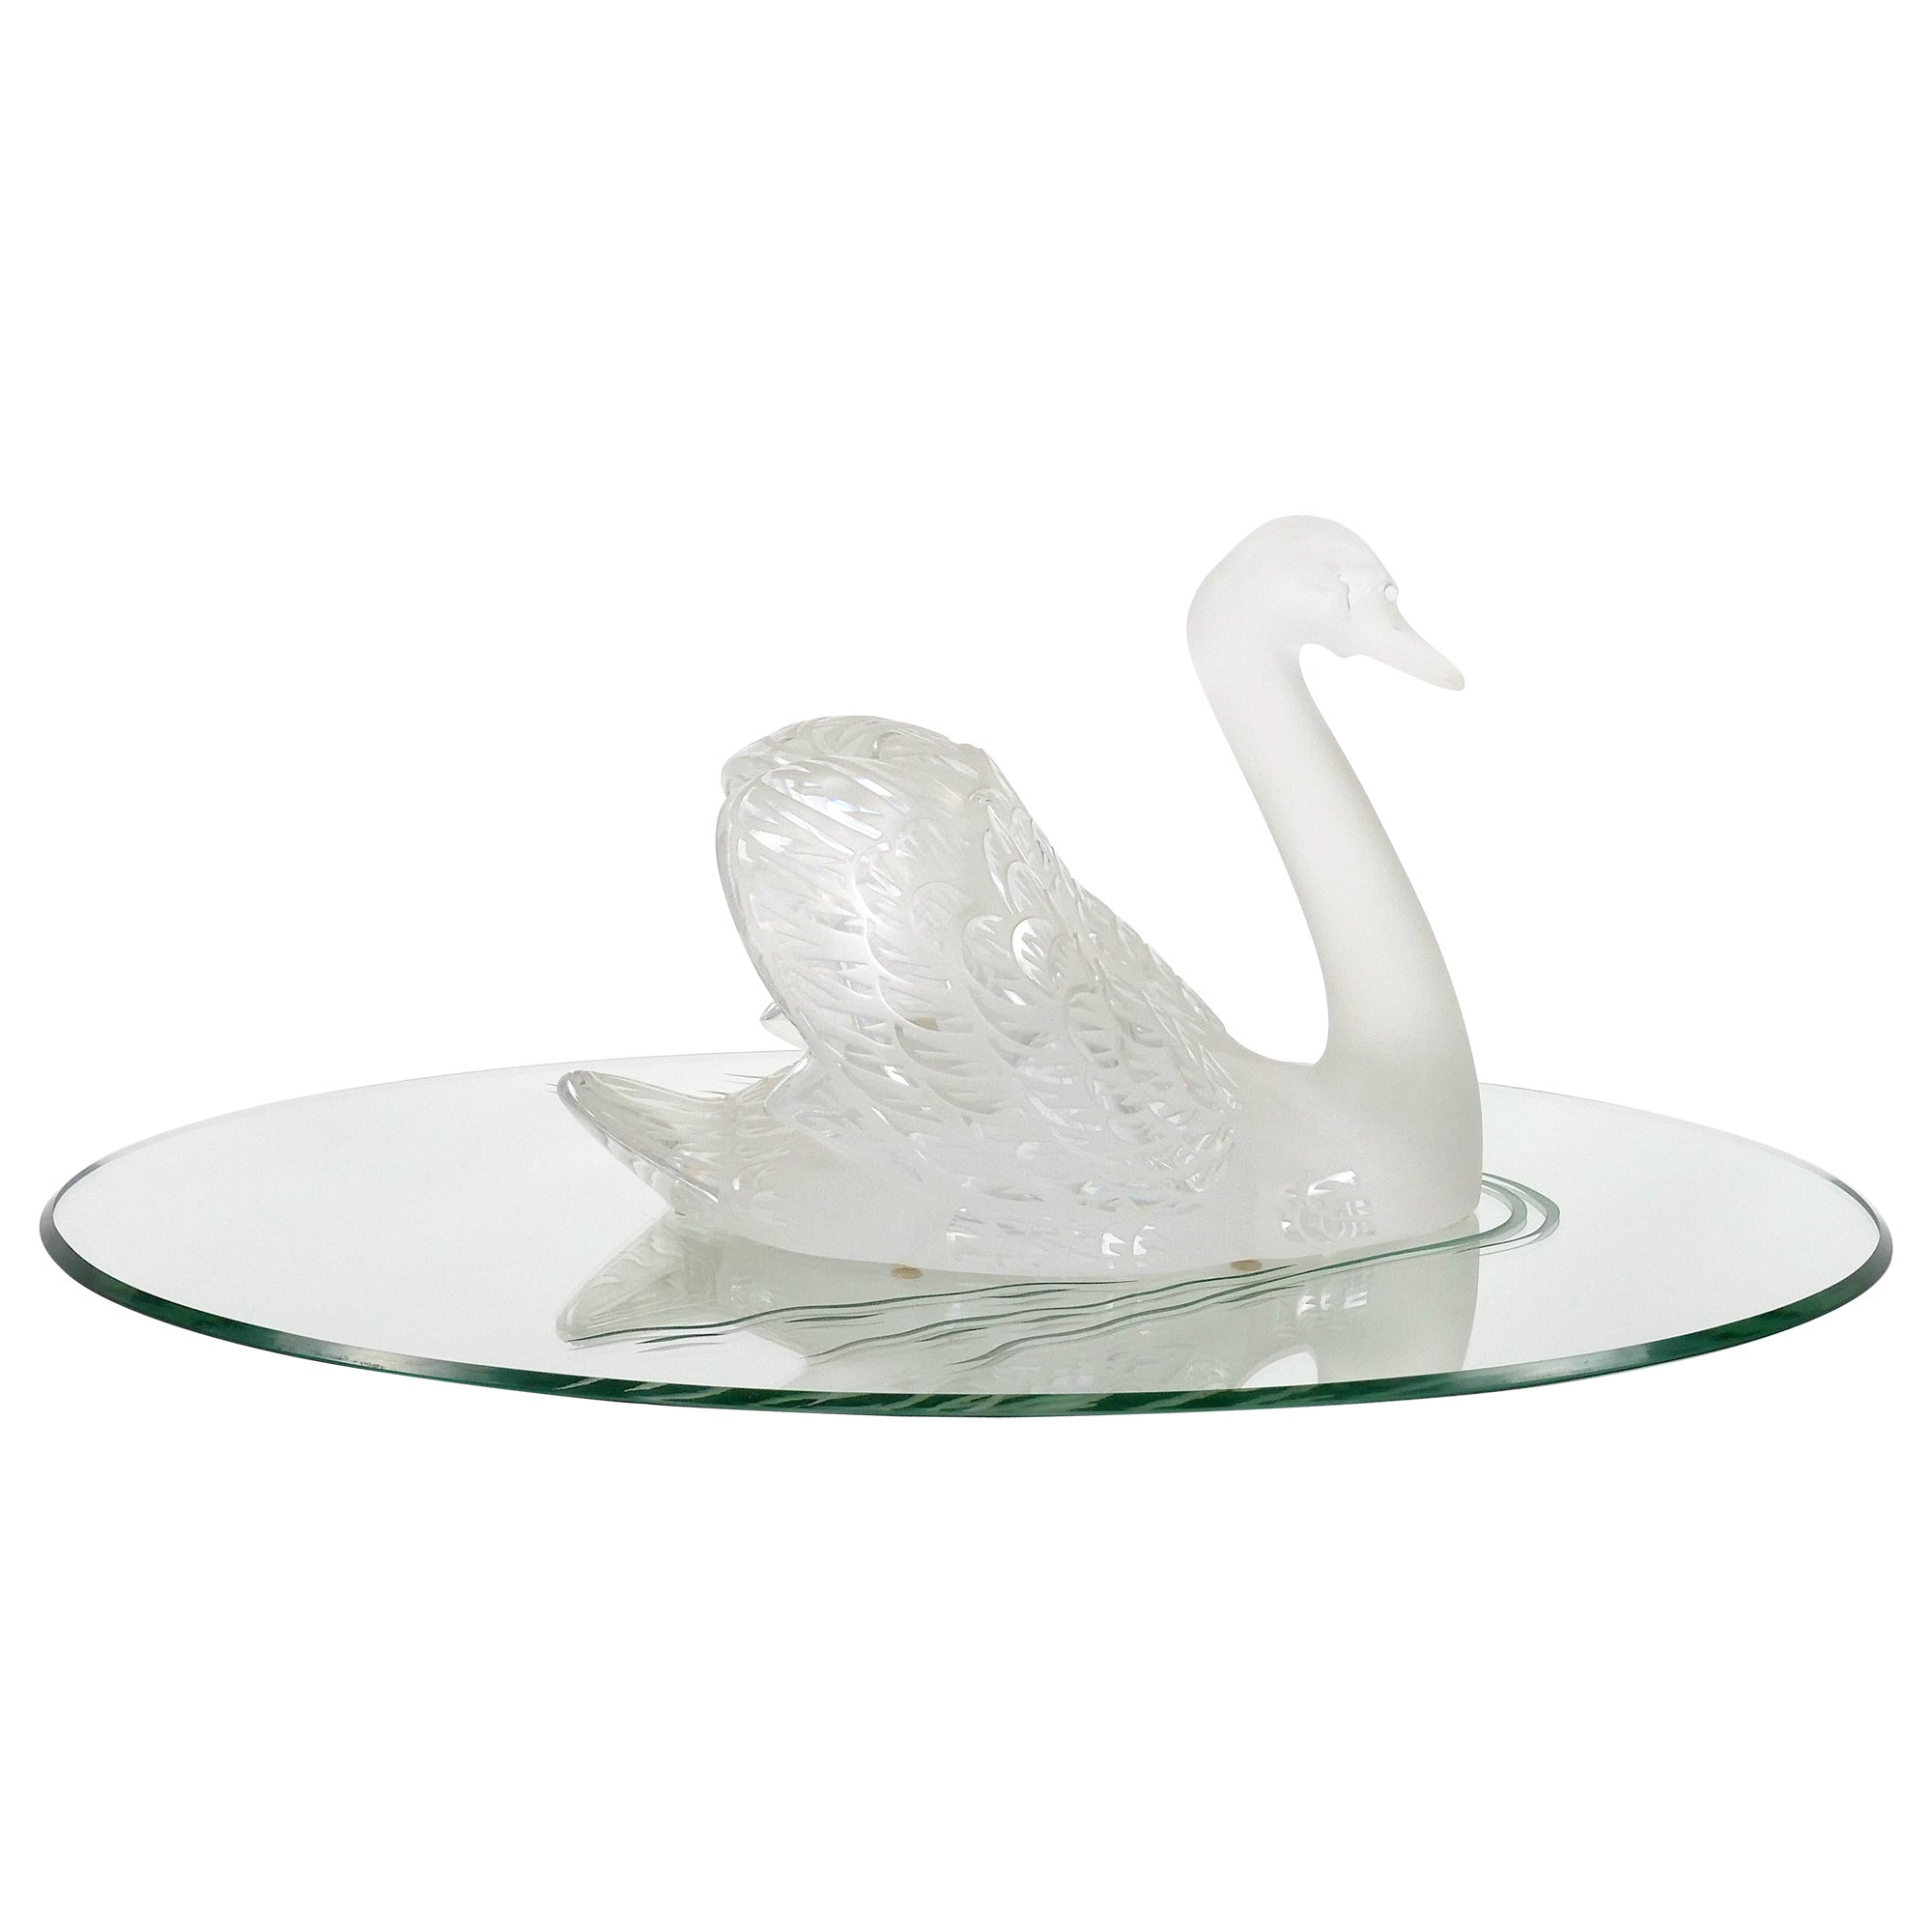  Lalique Crystal Frosted Head Down Swan Sculpture Resting On Mirrored Plateau en vente